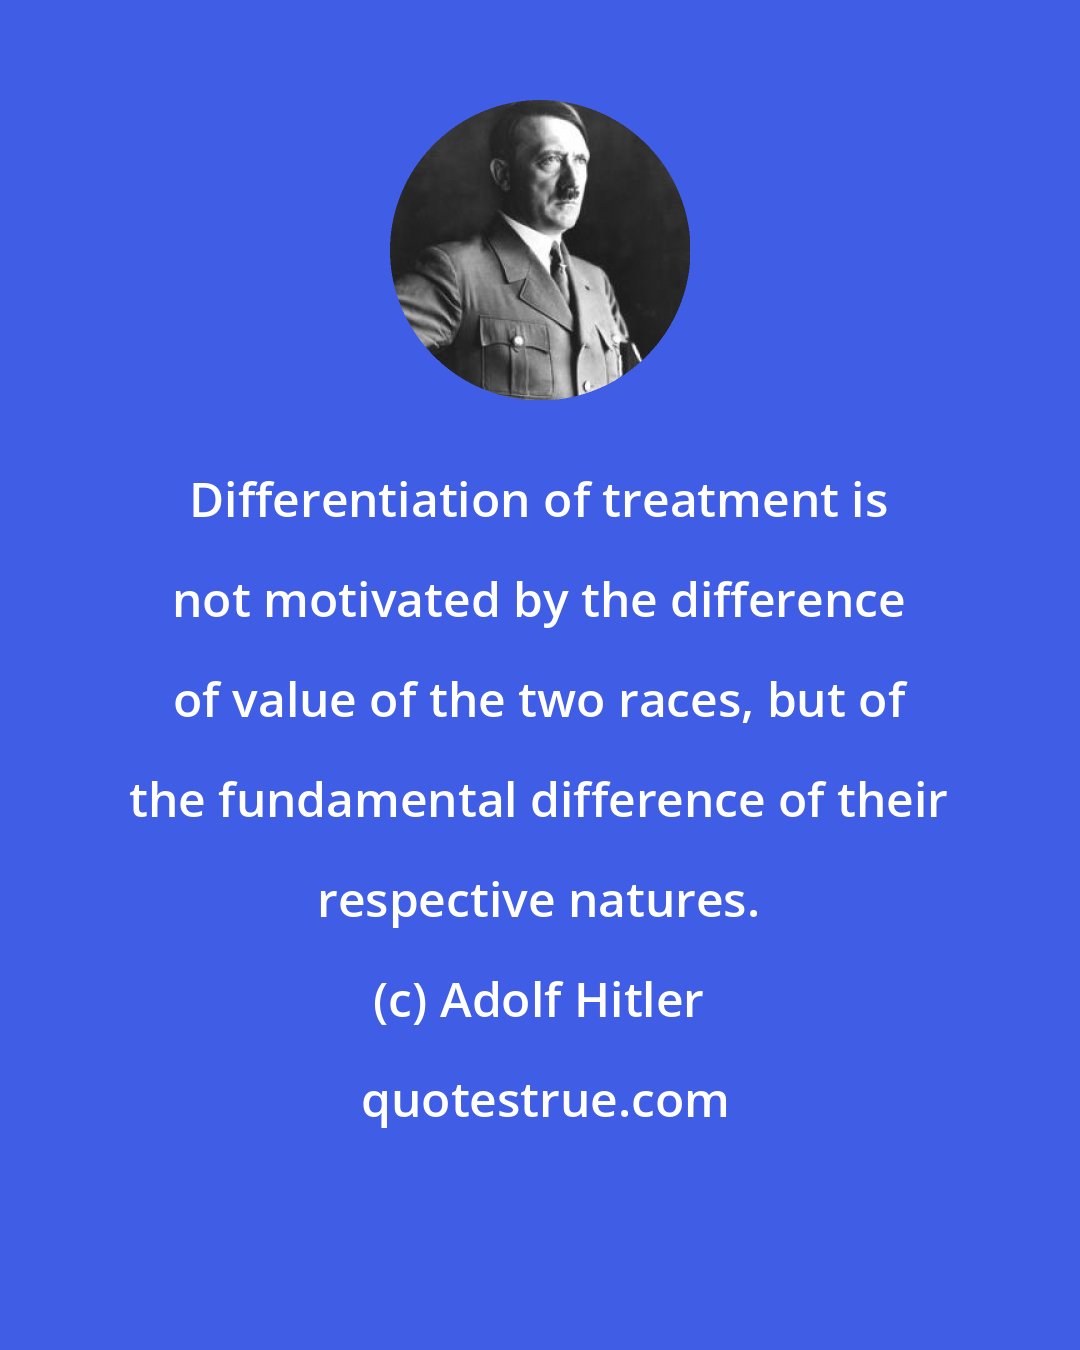 Adolf Hitler: Differentiation of treatment is not motivated by the difference of value of the two races, but of the fundamental difference of their respective natures.